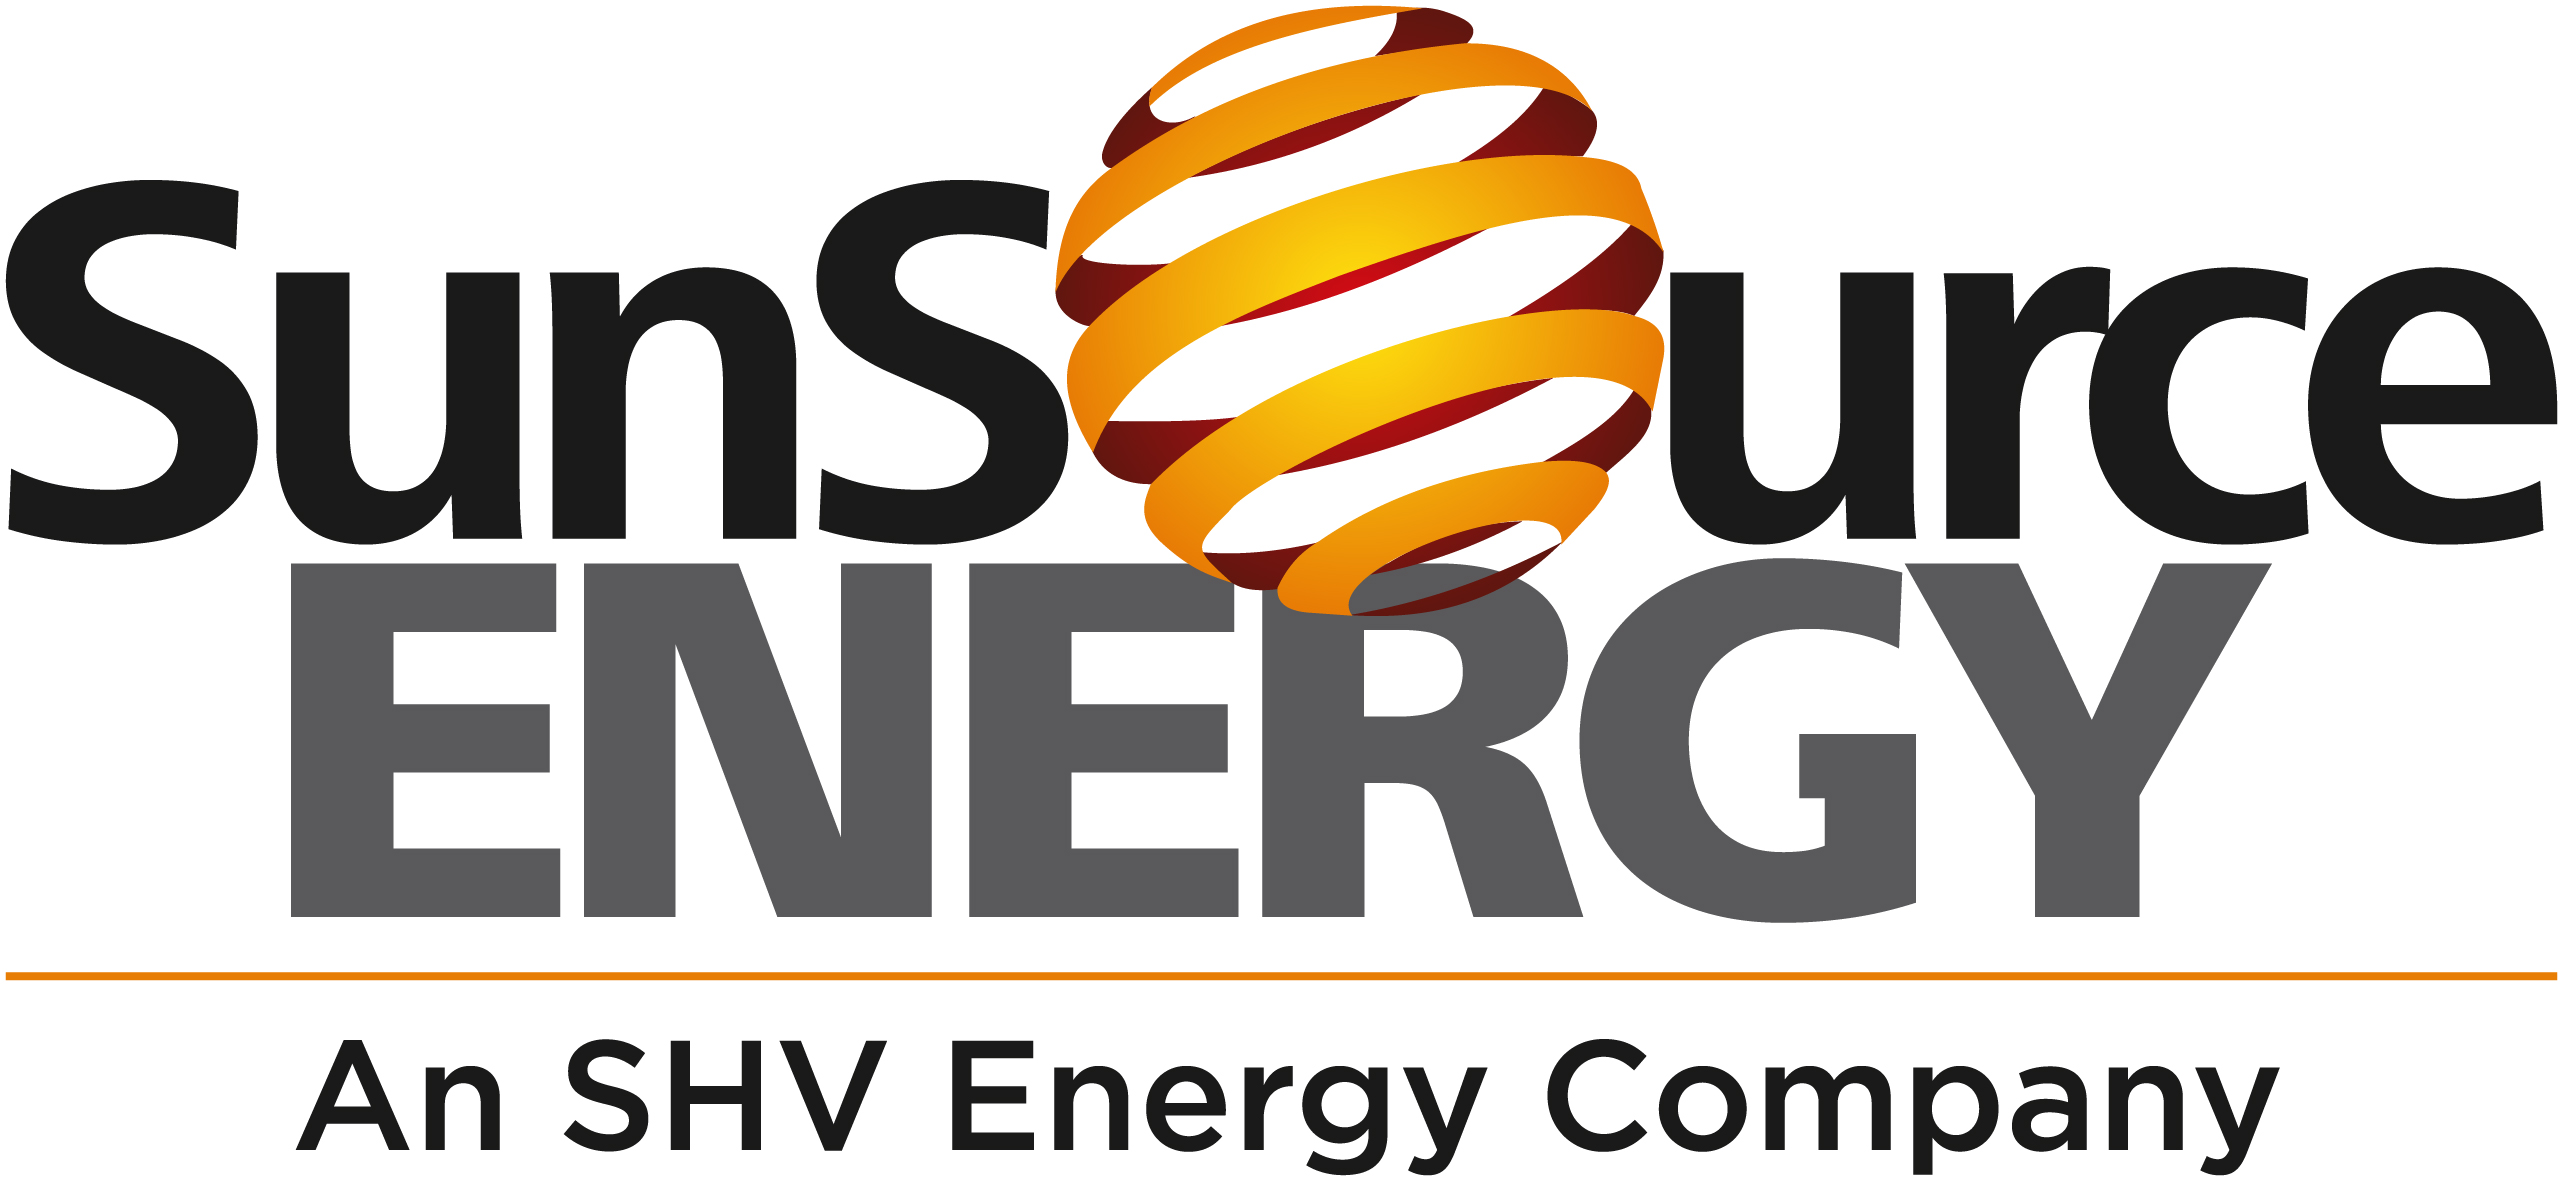 SunSource Energy secures funding from SHV Energy to facilitate growth, targeting a 1 GW+ portfolio in distributed solar